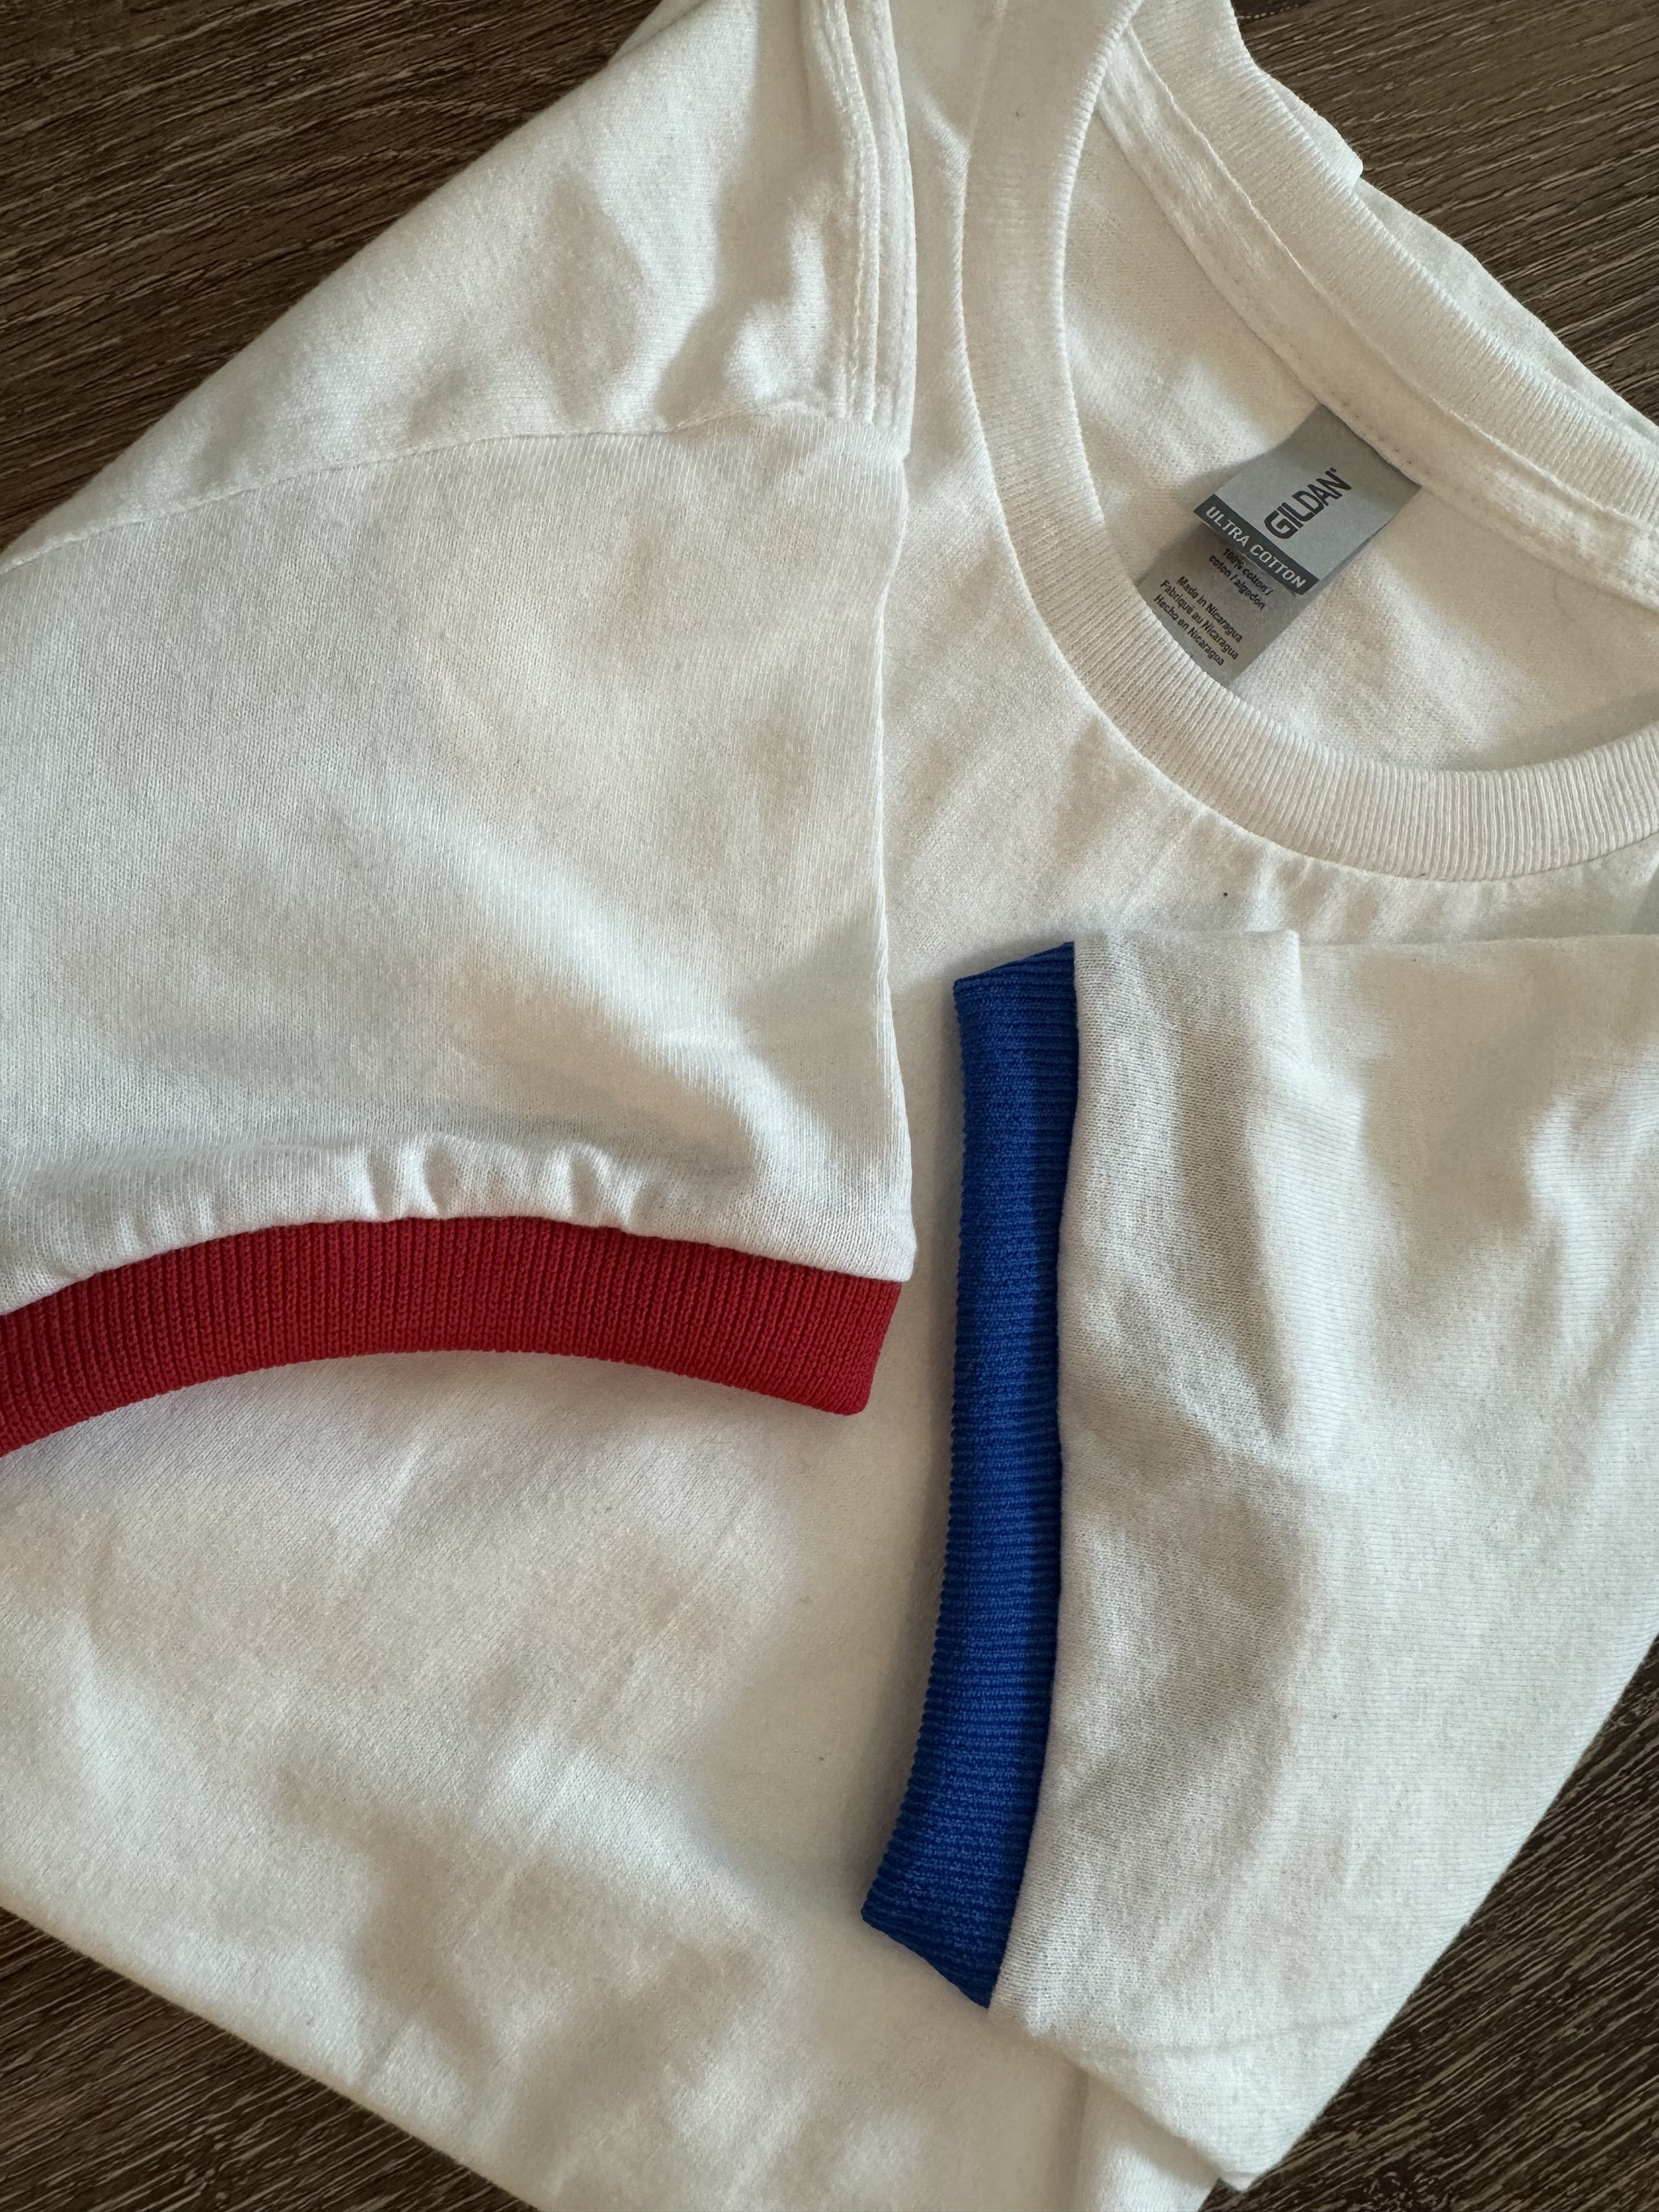 Sample image of Women's White Cotton T-Shirt w/ Red & Blue Cuffs